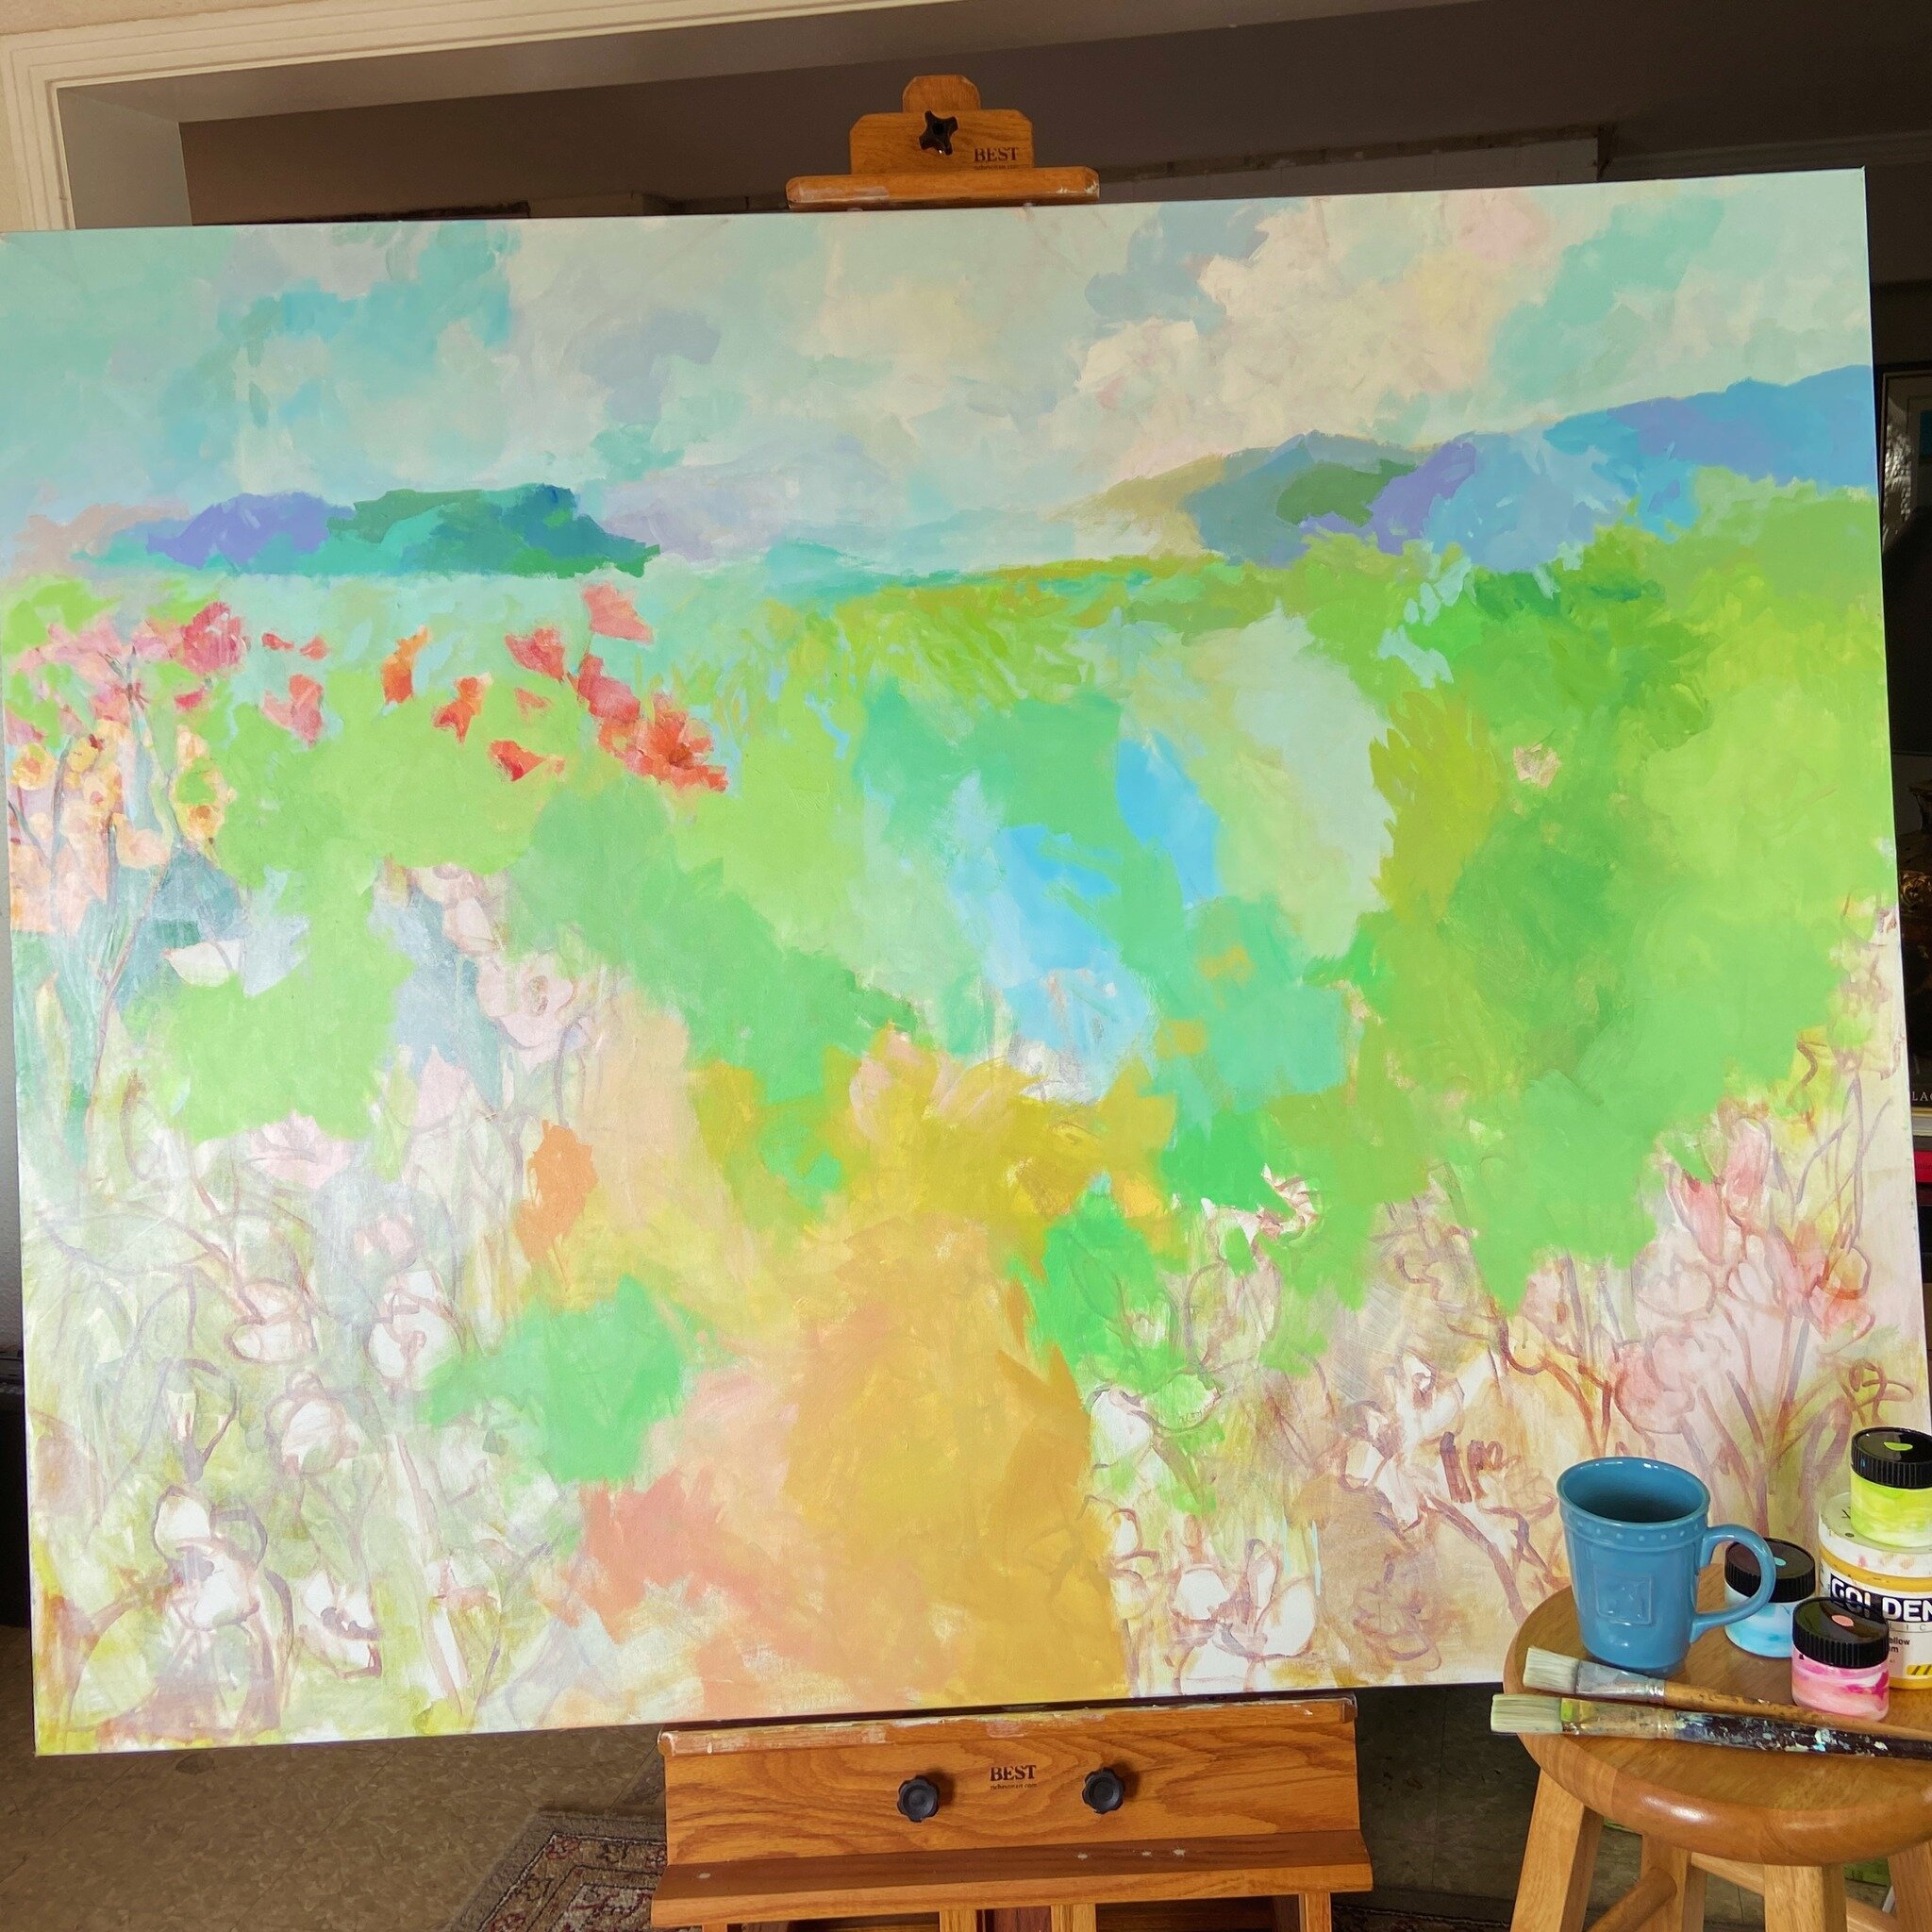 Good morning giant challenge! This 48X60 canvas has been tossed around from garage to garage surviving the move and it&rsquo;s time it got some paint slapped on it. Personally loving these yummy colors and I&rsquo;m up for the challenge. Let&rsquo;s 